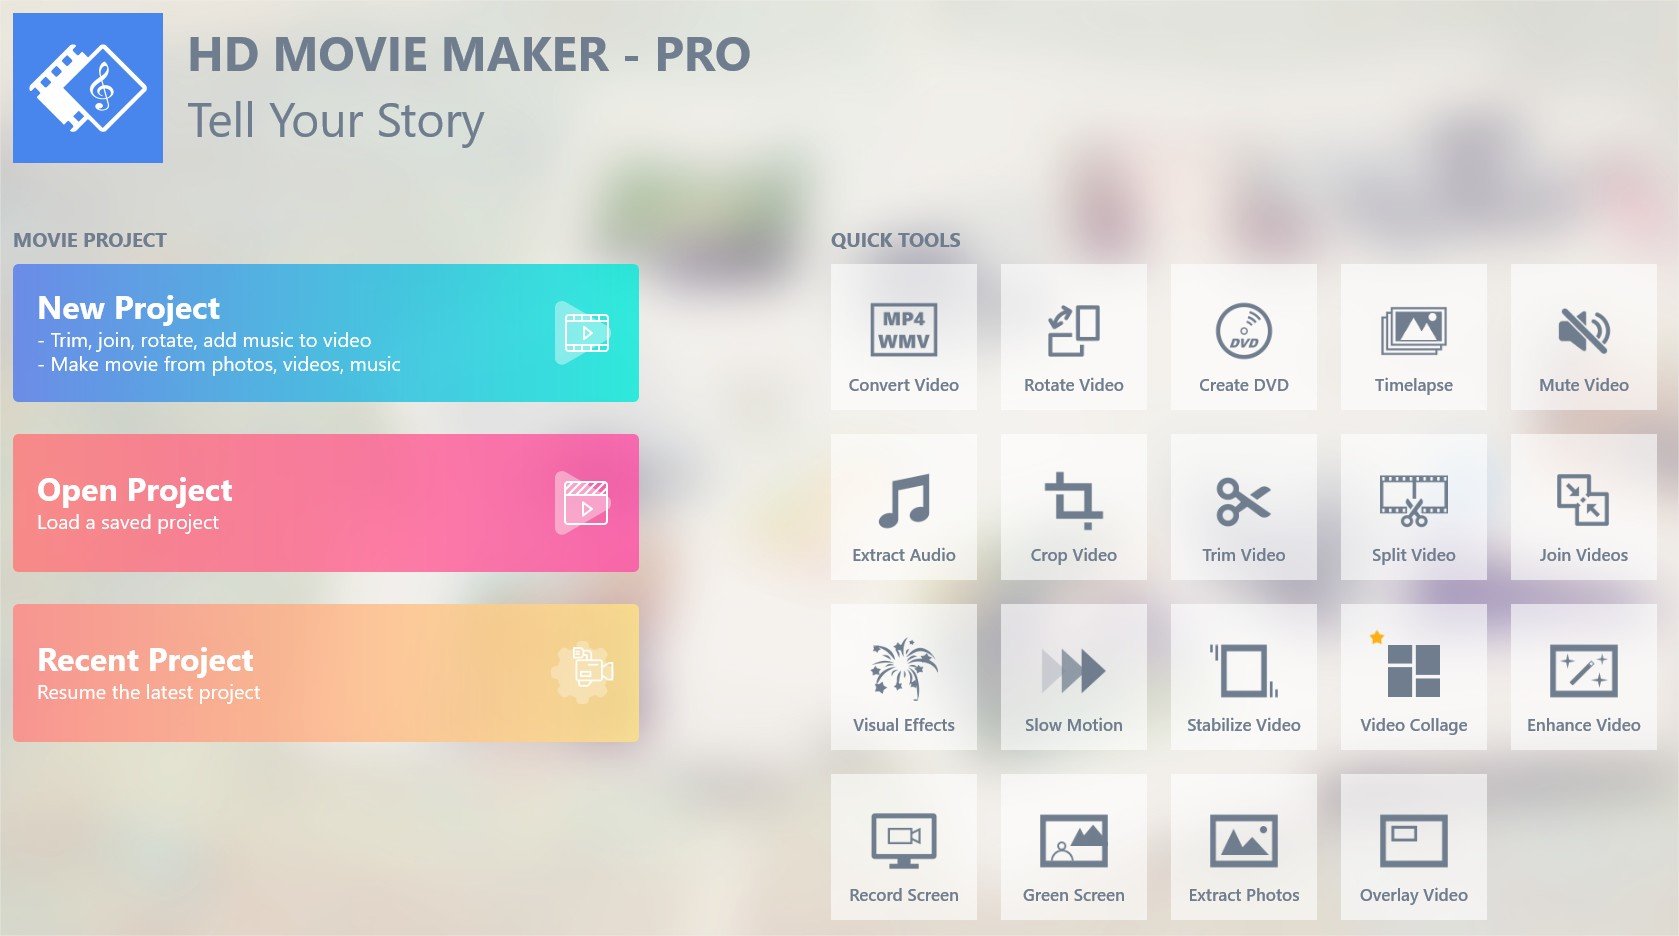 hd movie maker pro, hd movie maker pro review, hd movie maker pro tutorial, hd movie maker pro manual, hd movie maker pro download, hd movie maker pro fade out,